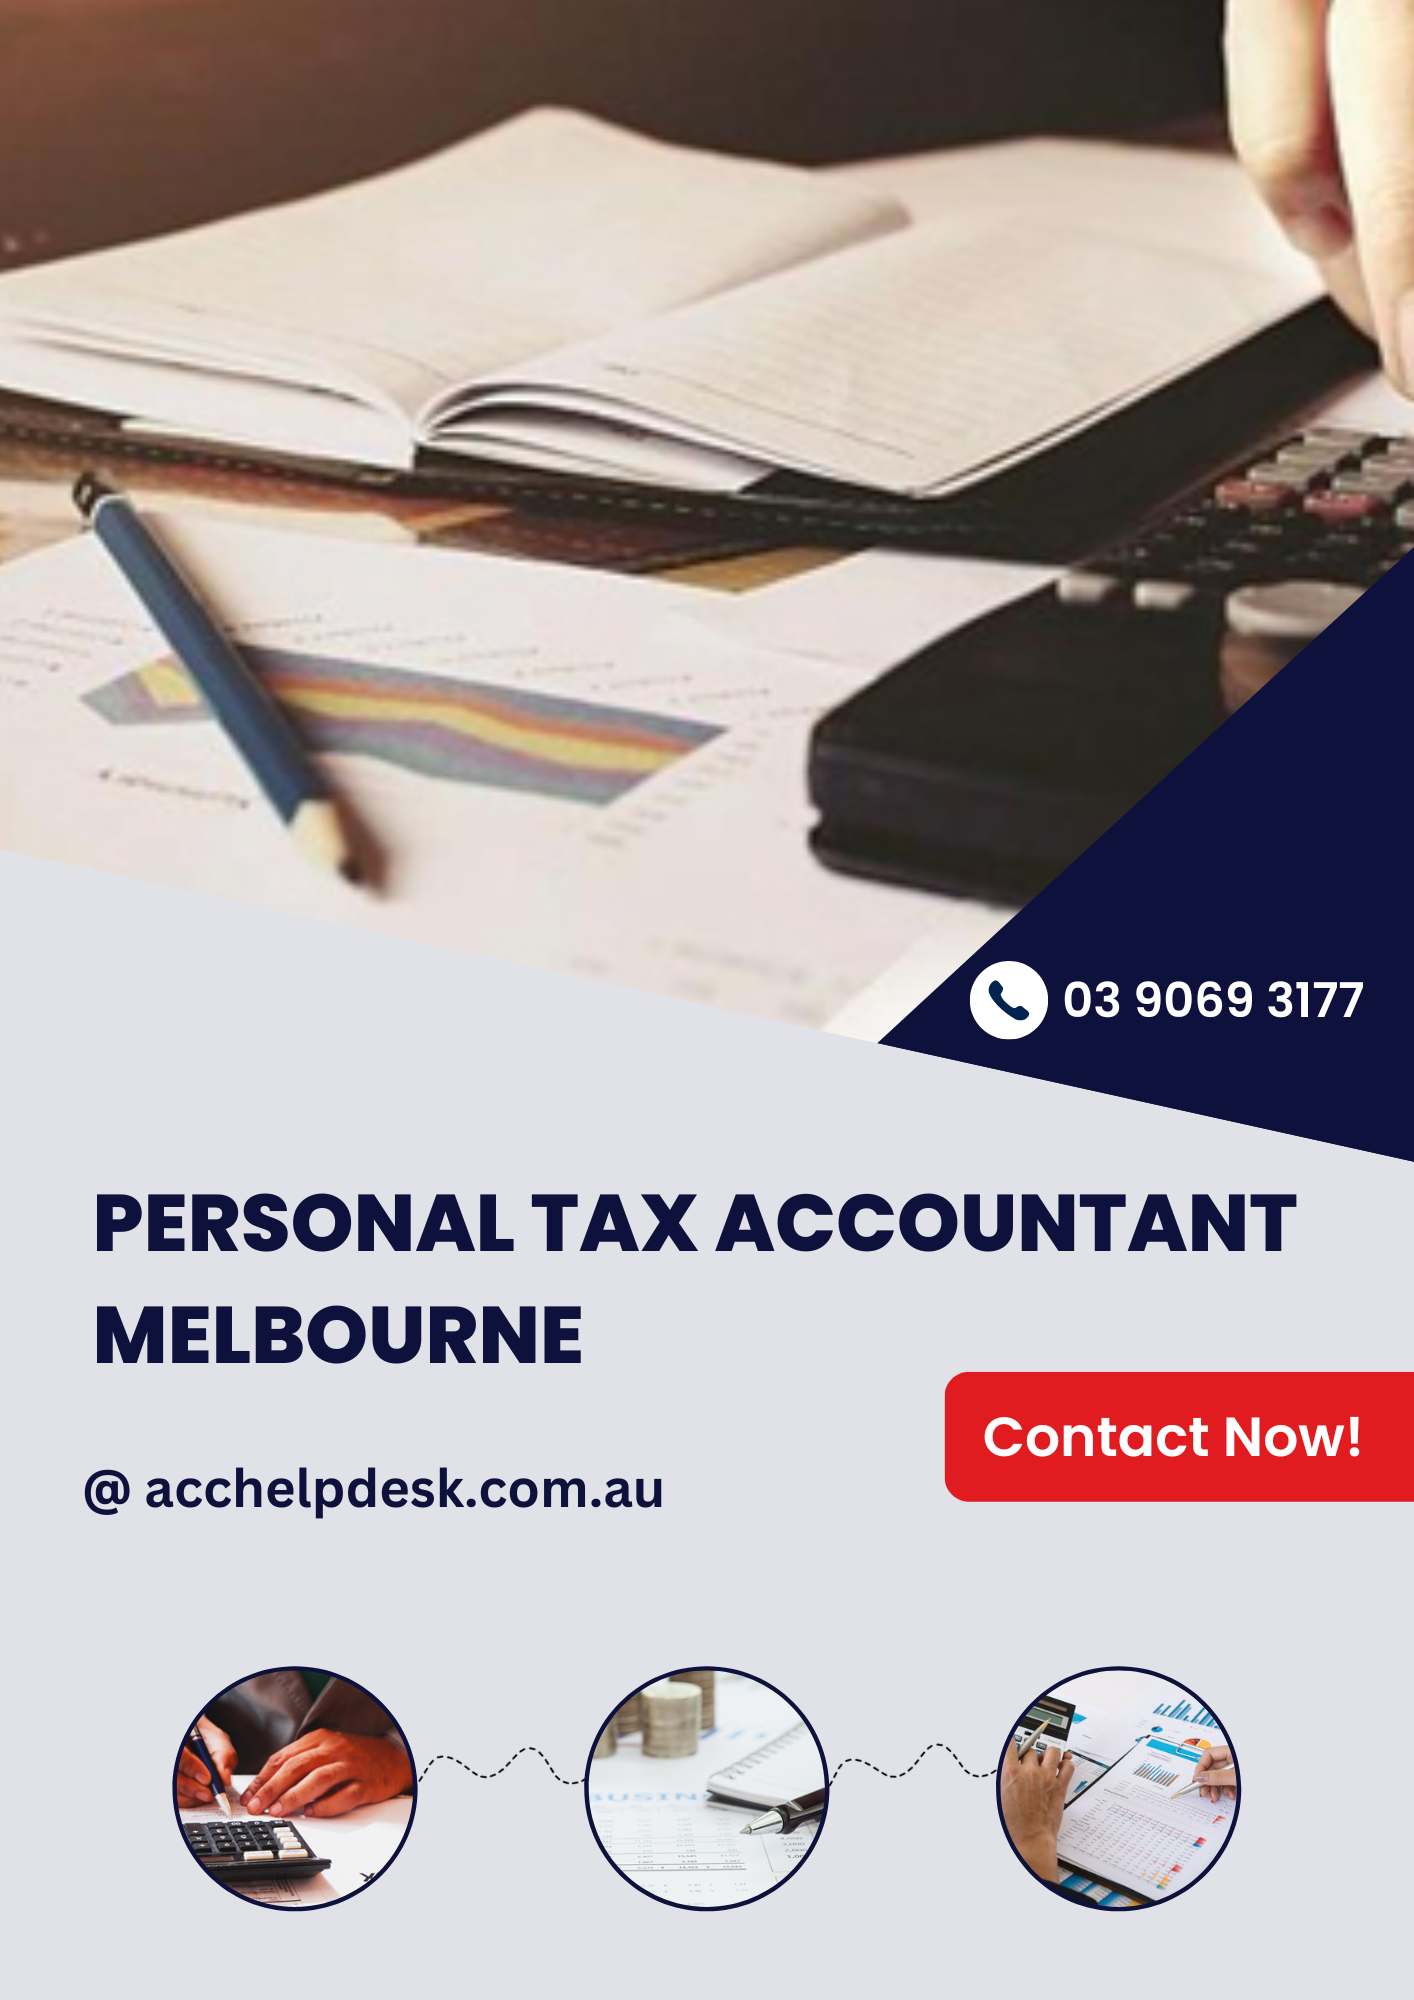 Personal Tax Accountant Melbourne